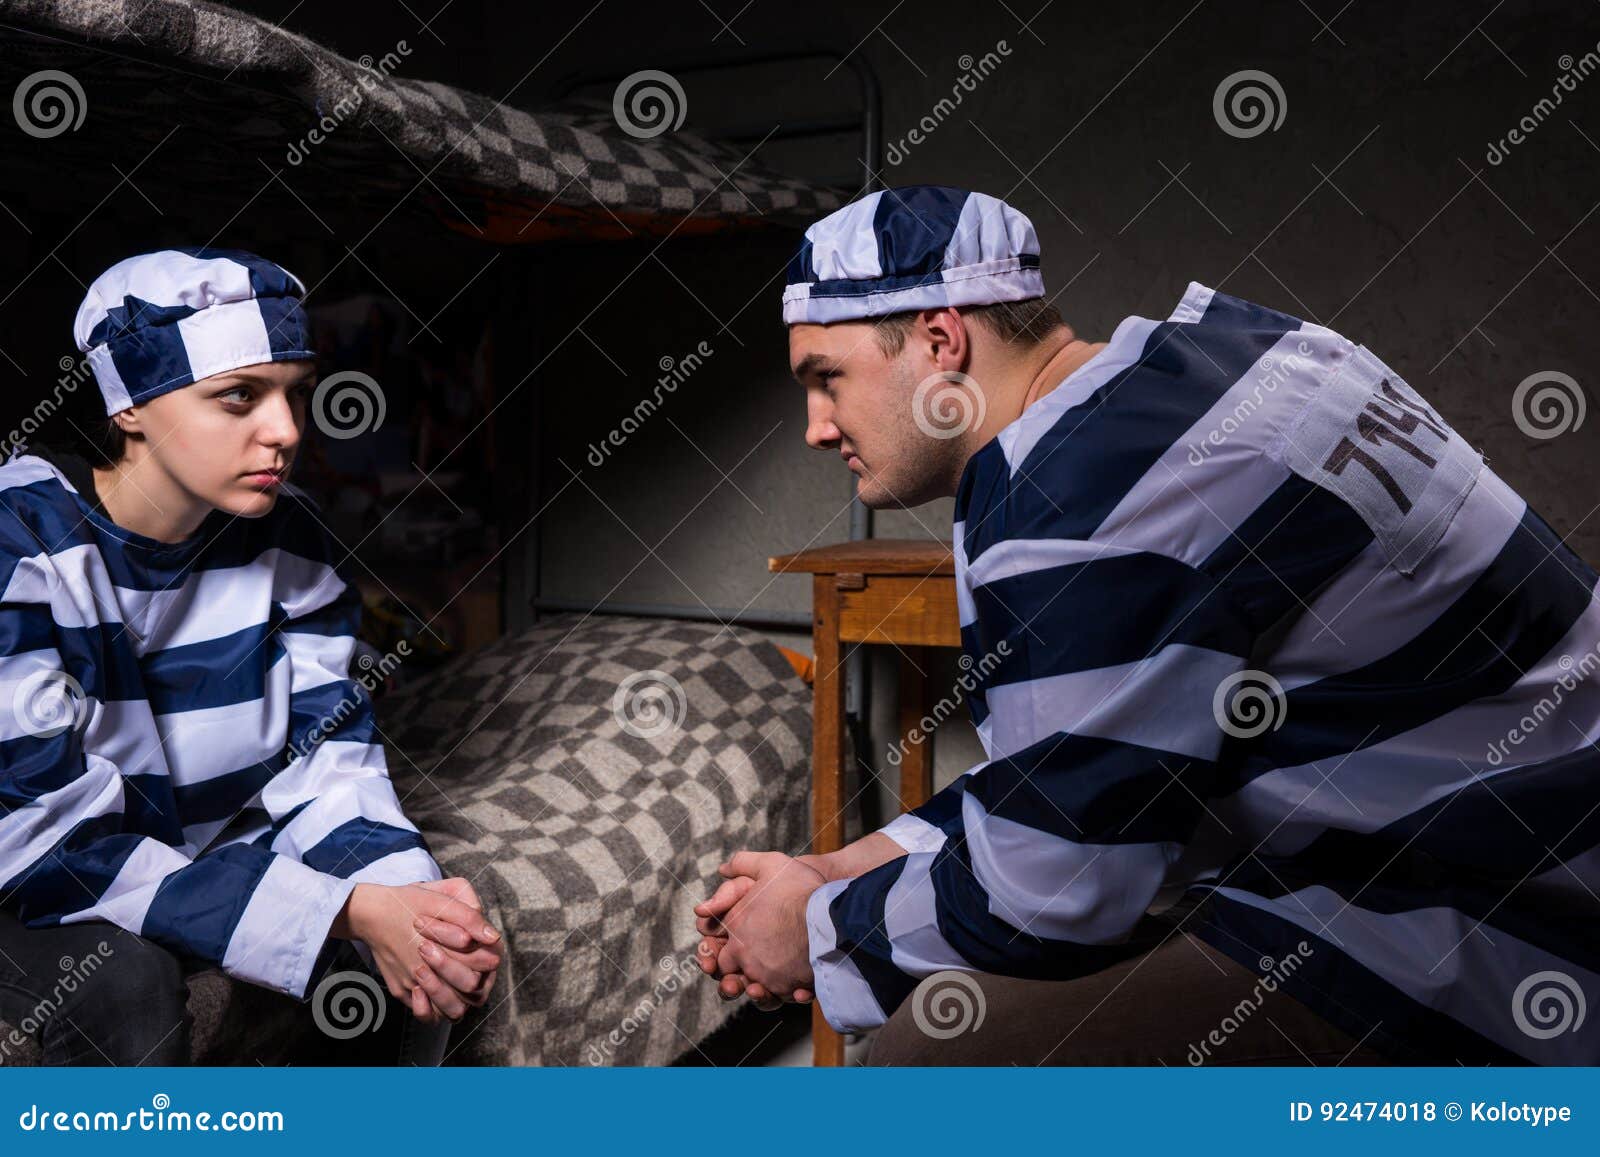 young male and female prisoners wearing prison uniform sitting a